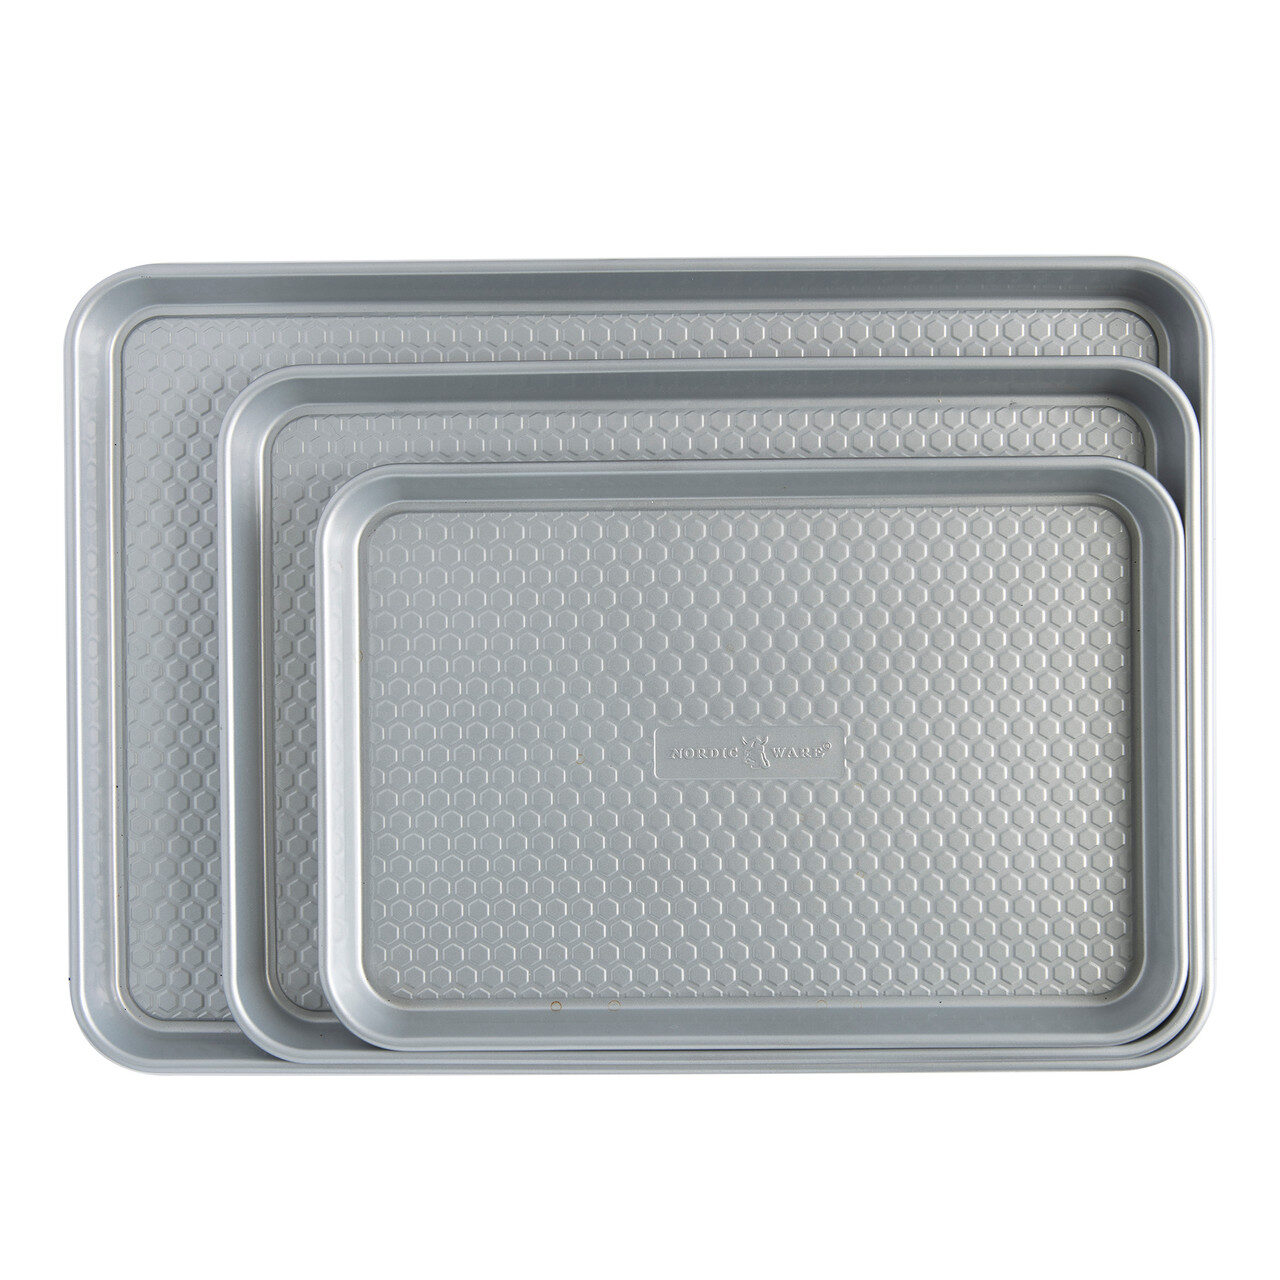 Nordic Ware Silver Insulated Baking Sheet, 1 ct - Baker's